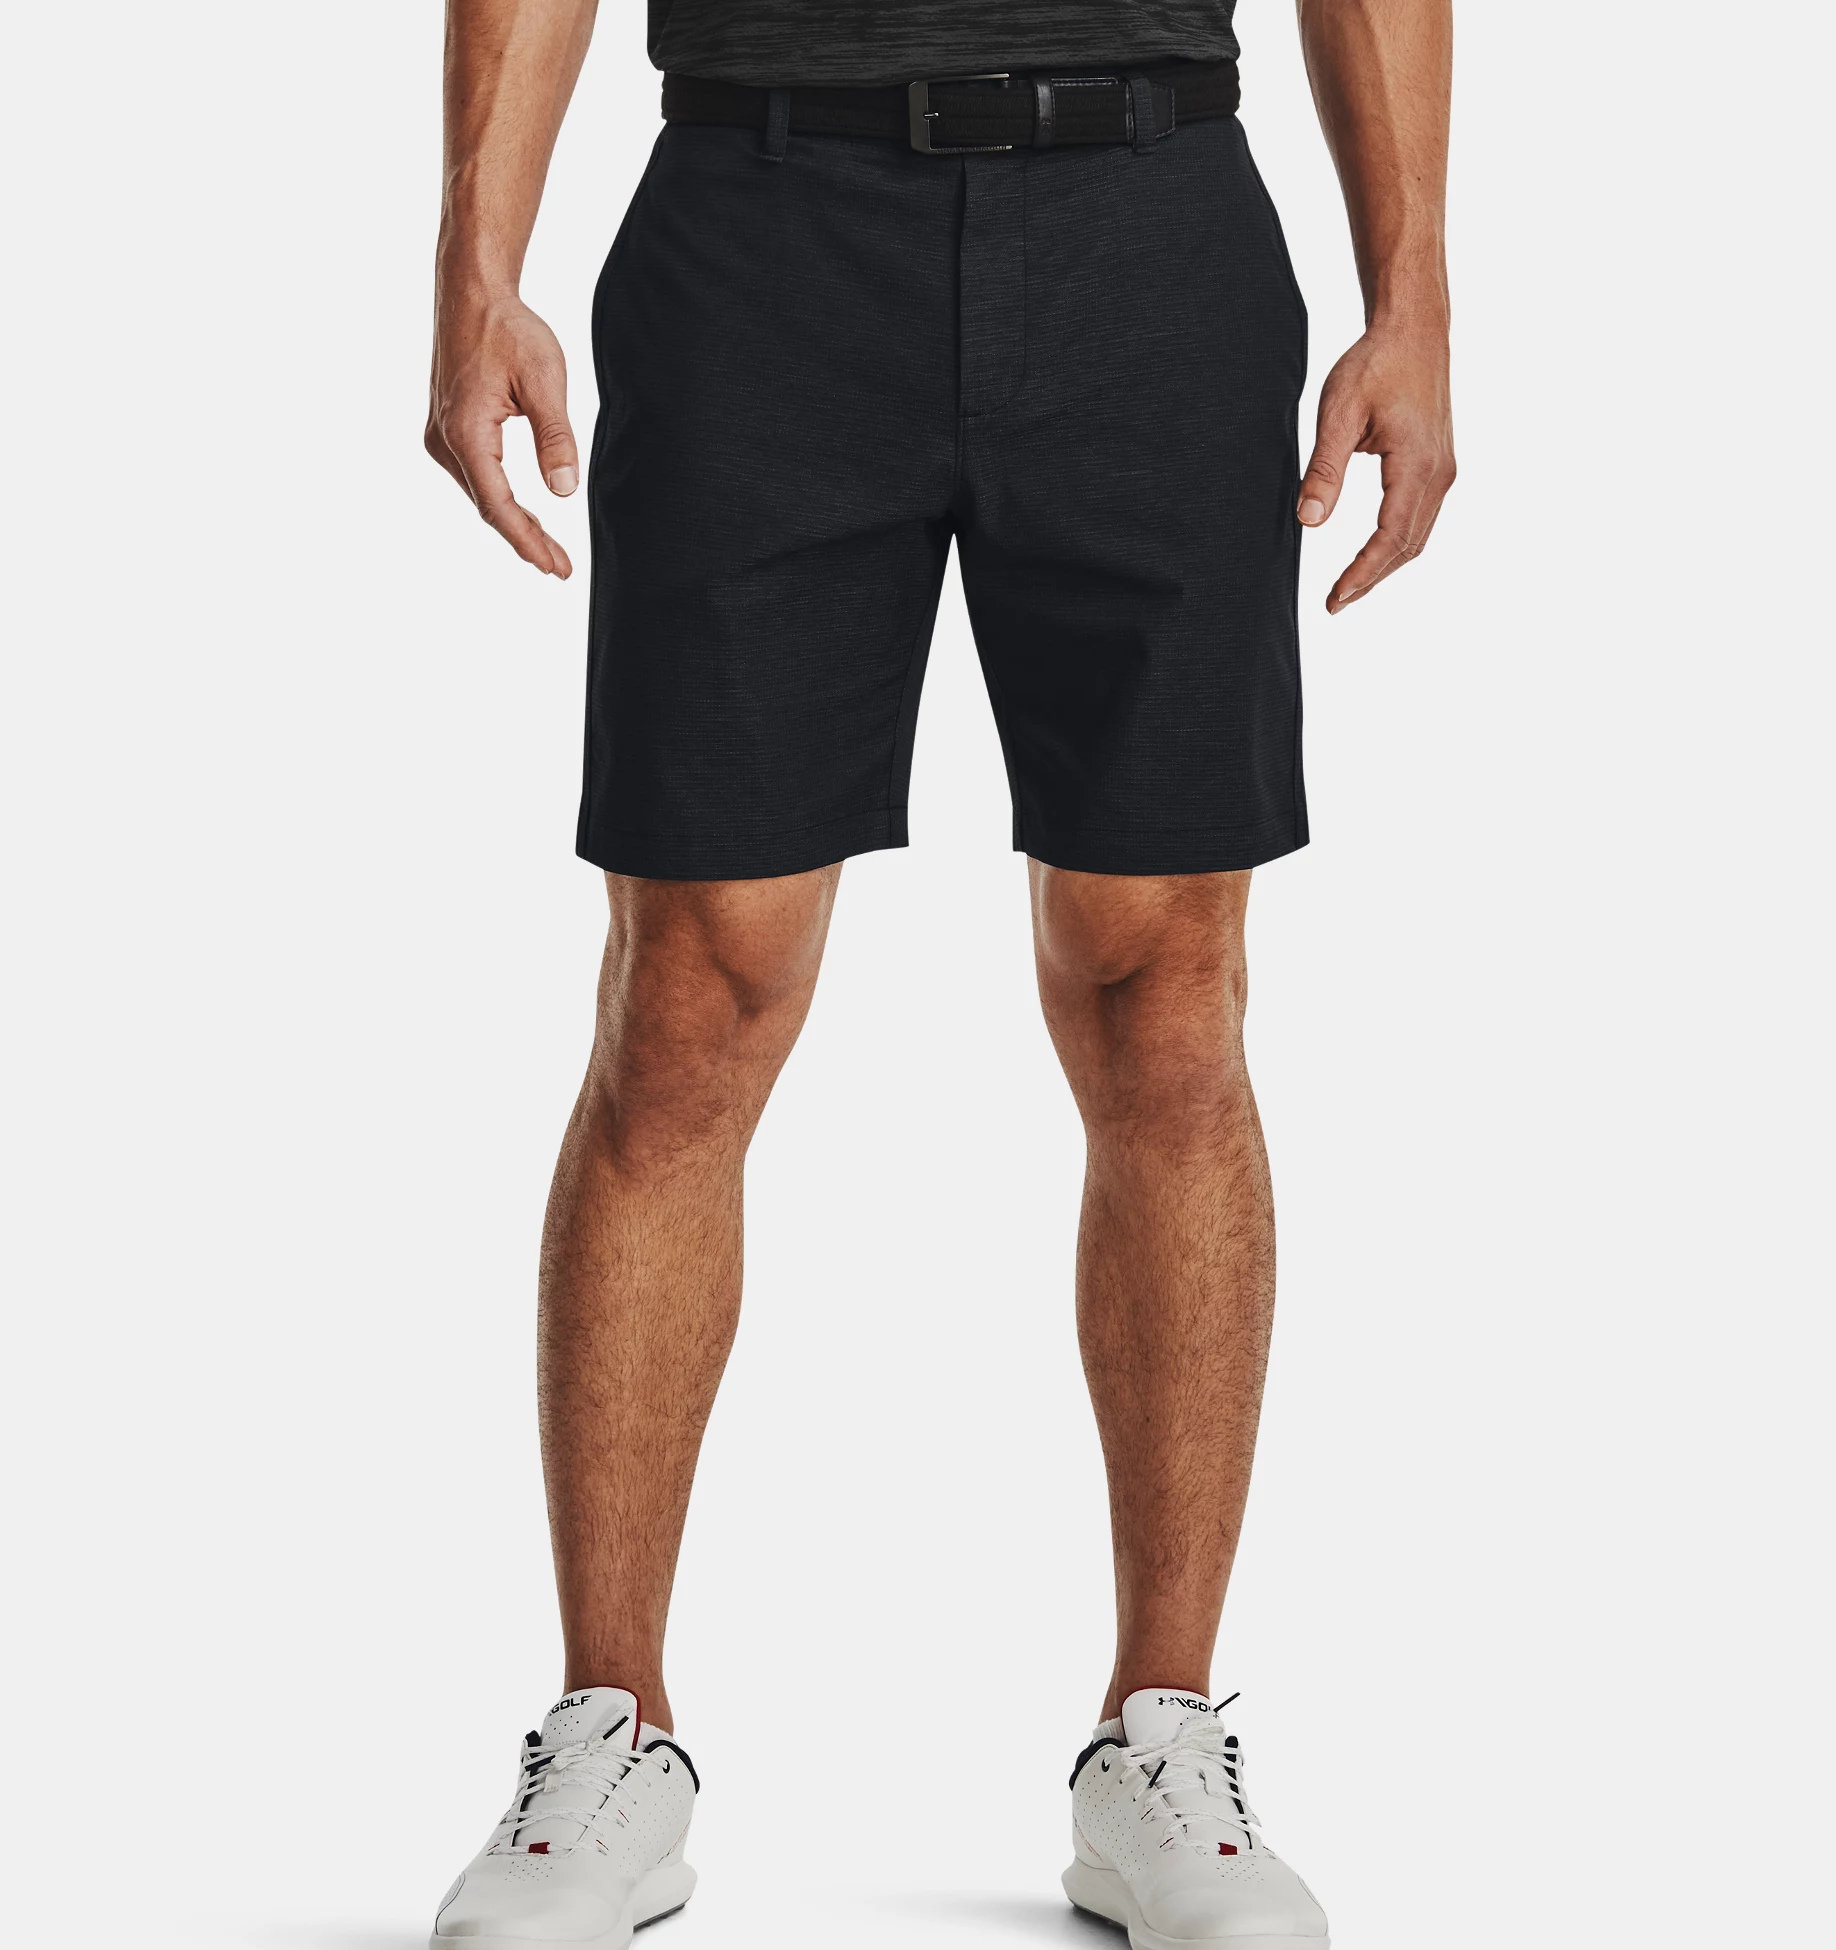 UA | 1370084-001 | Iso-Chill Airvent Short | Black / Halo Grey